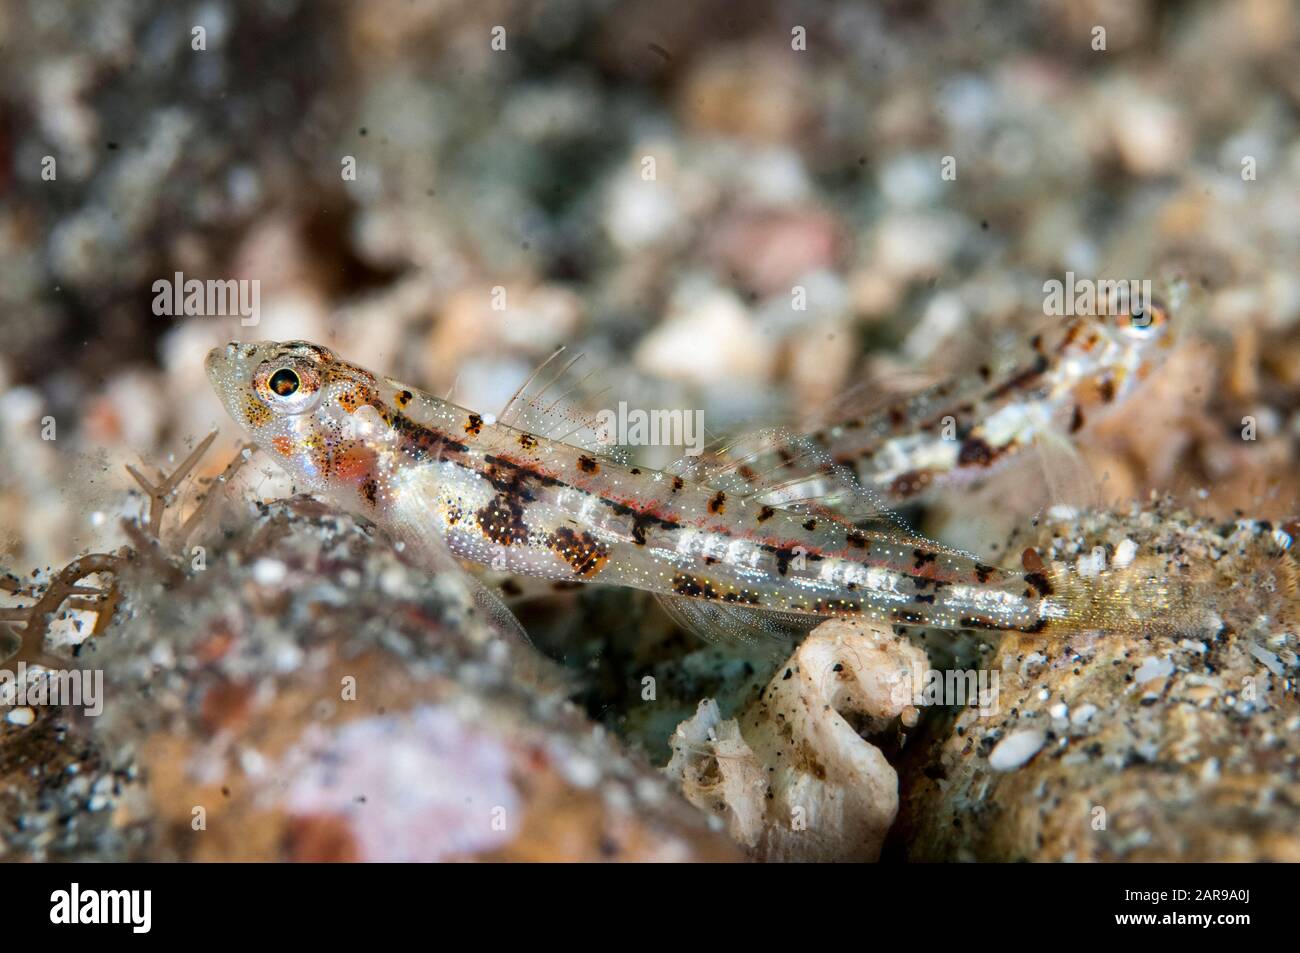 Pair of Bali Gobies, Grallenia baliensis, Makawide Wall dive site, Lembeh Straits, Sulawesi, Indonesia, Pacific Ocean Stock Photo